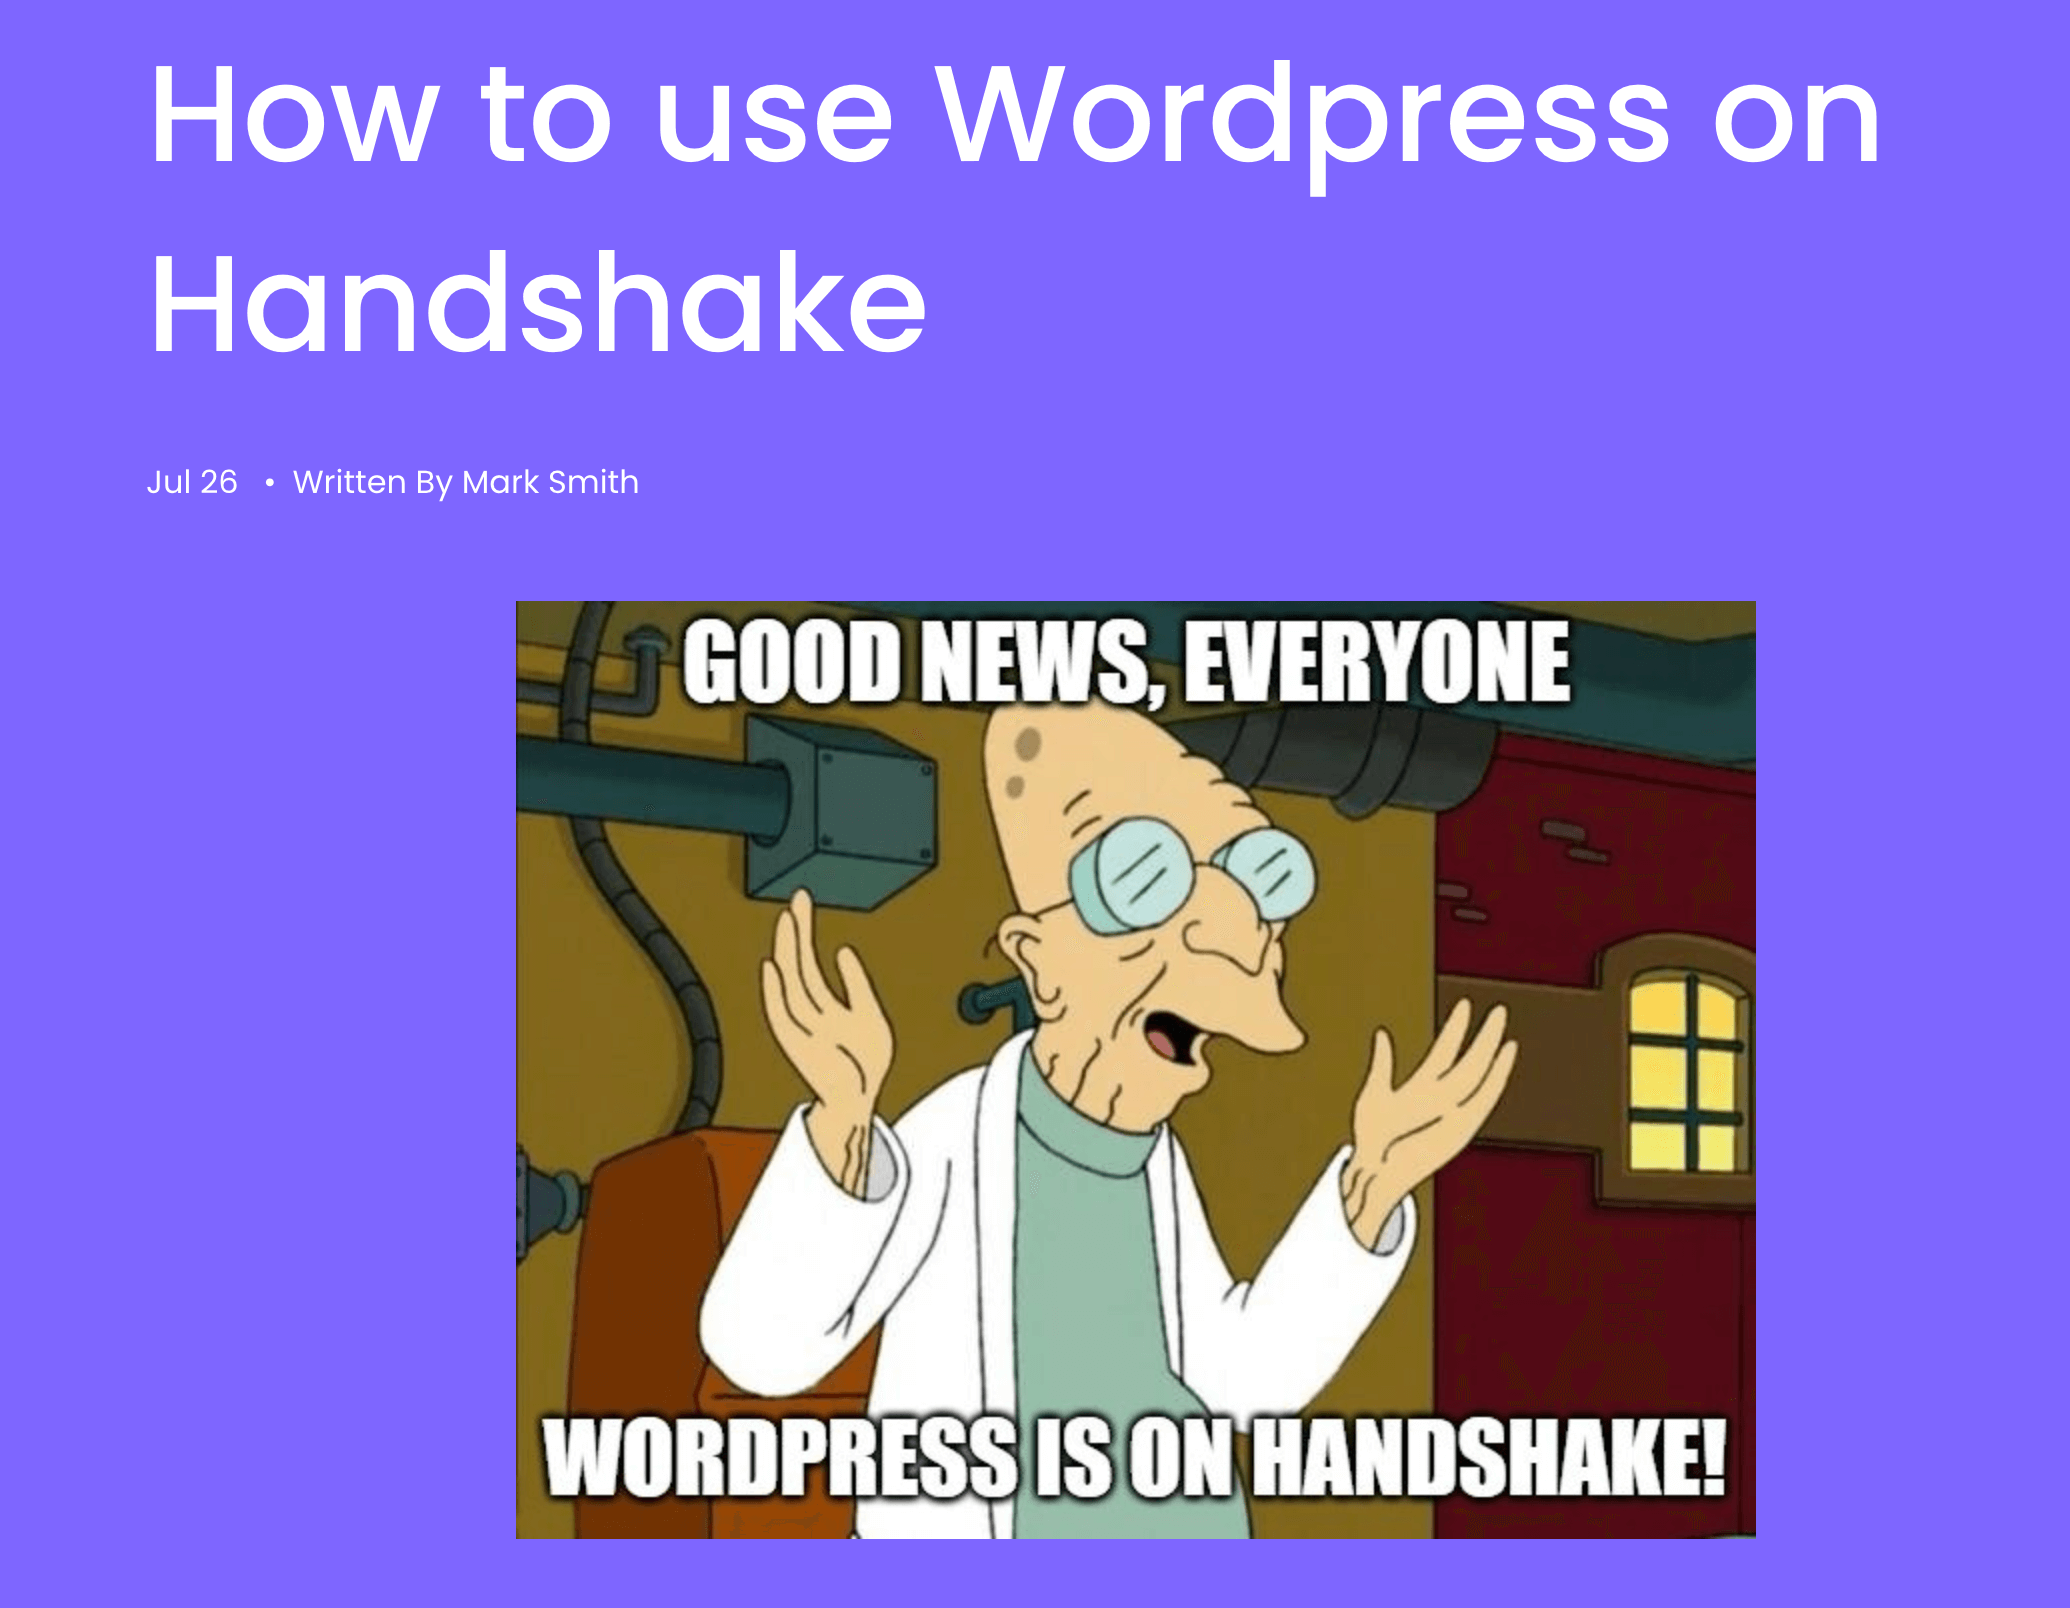 Getting ready to launch a mirror of my blog on a Handshake domain